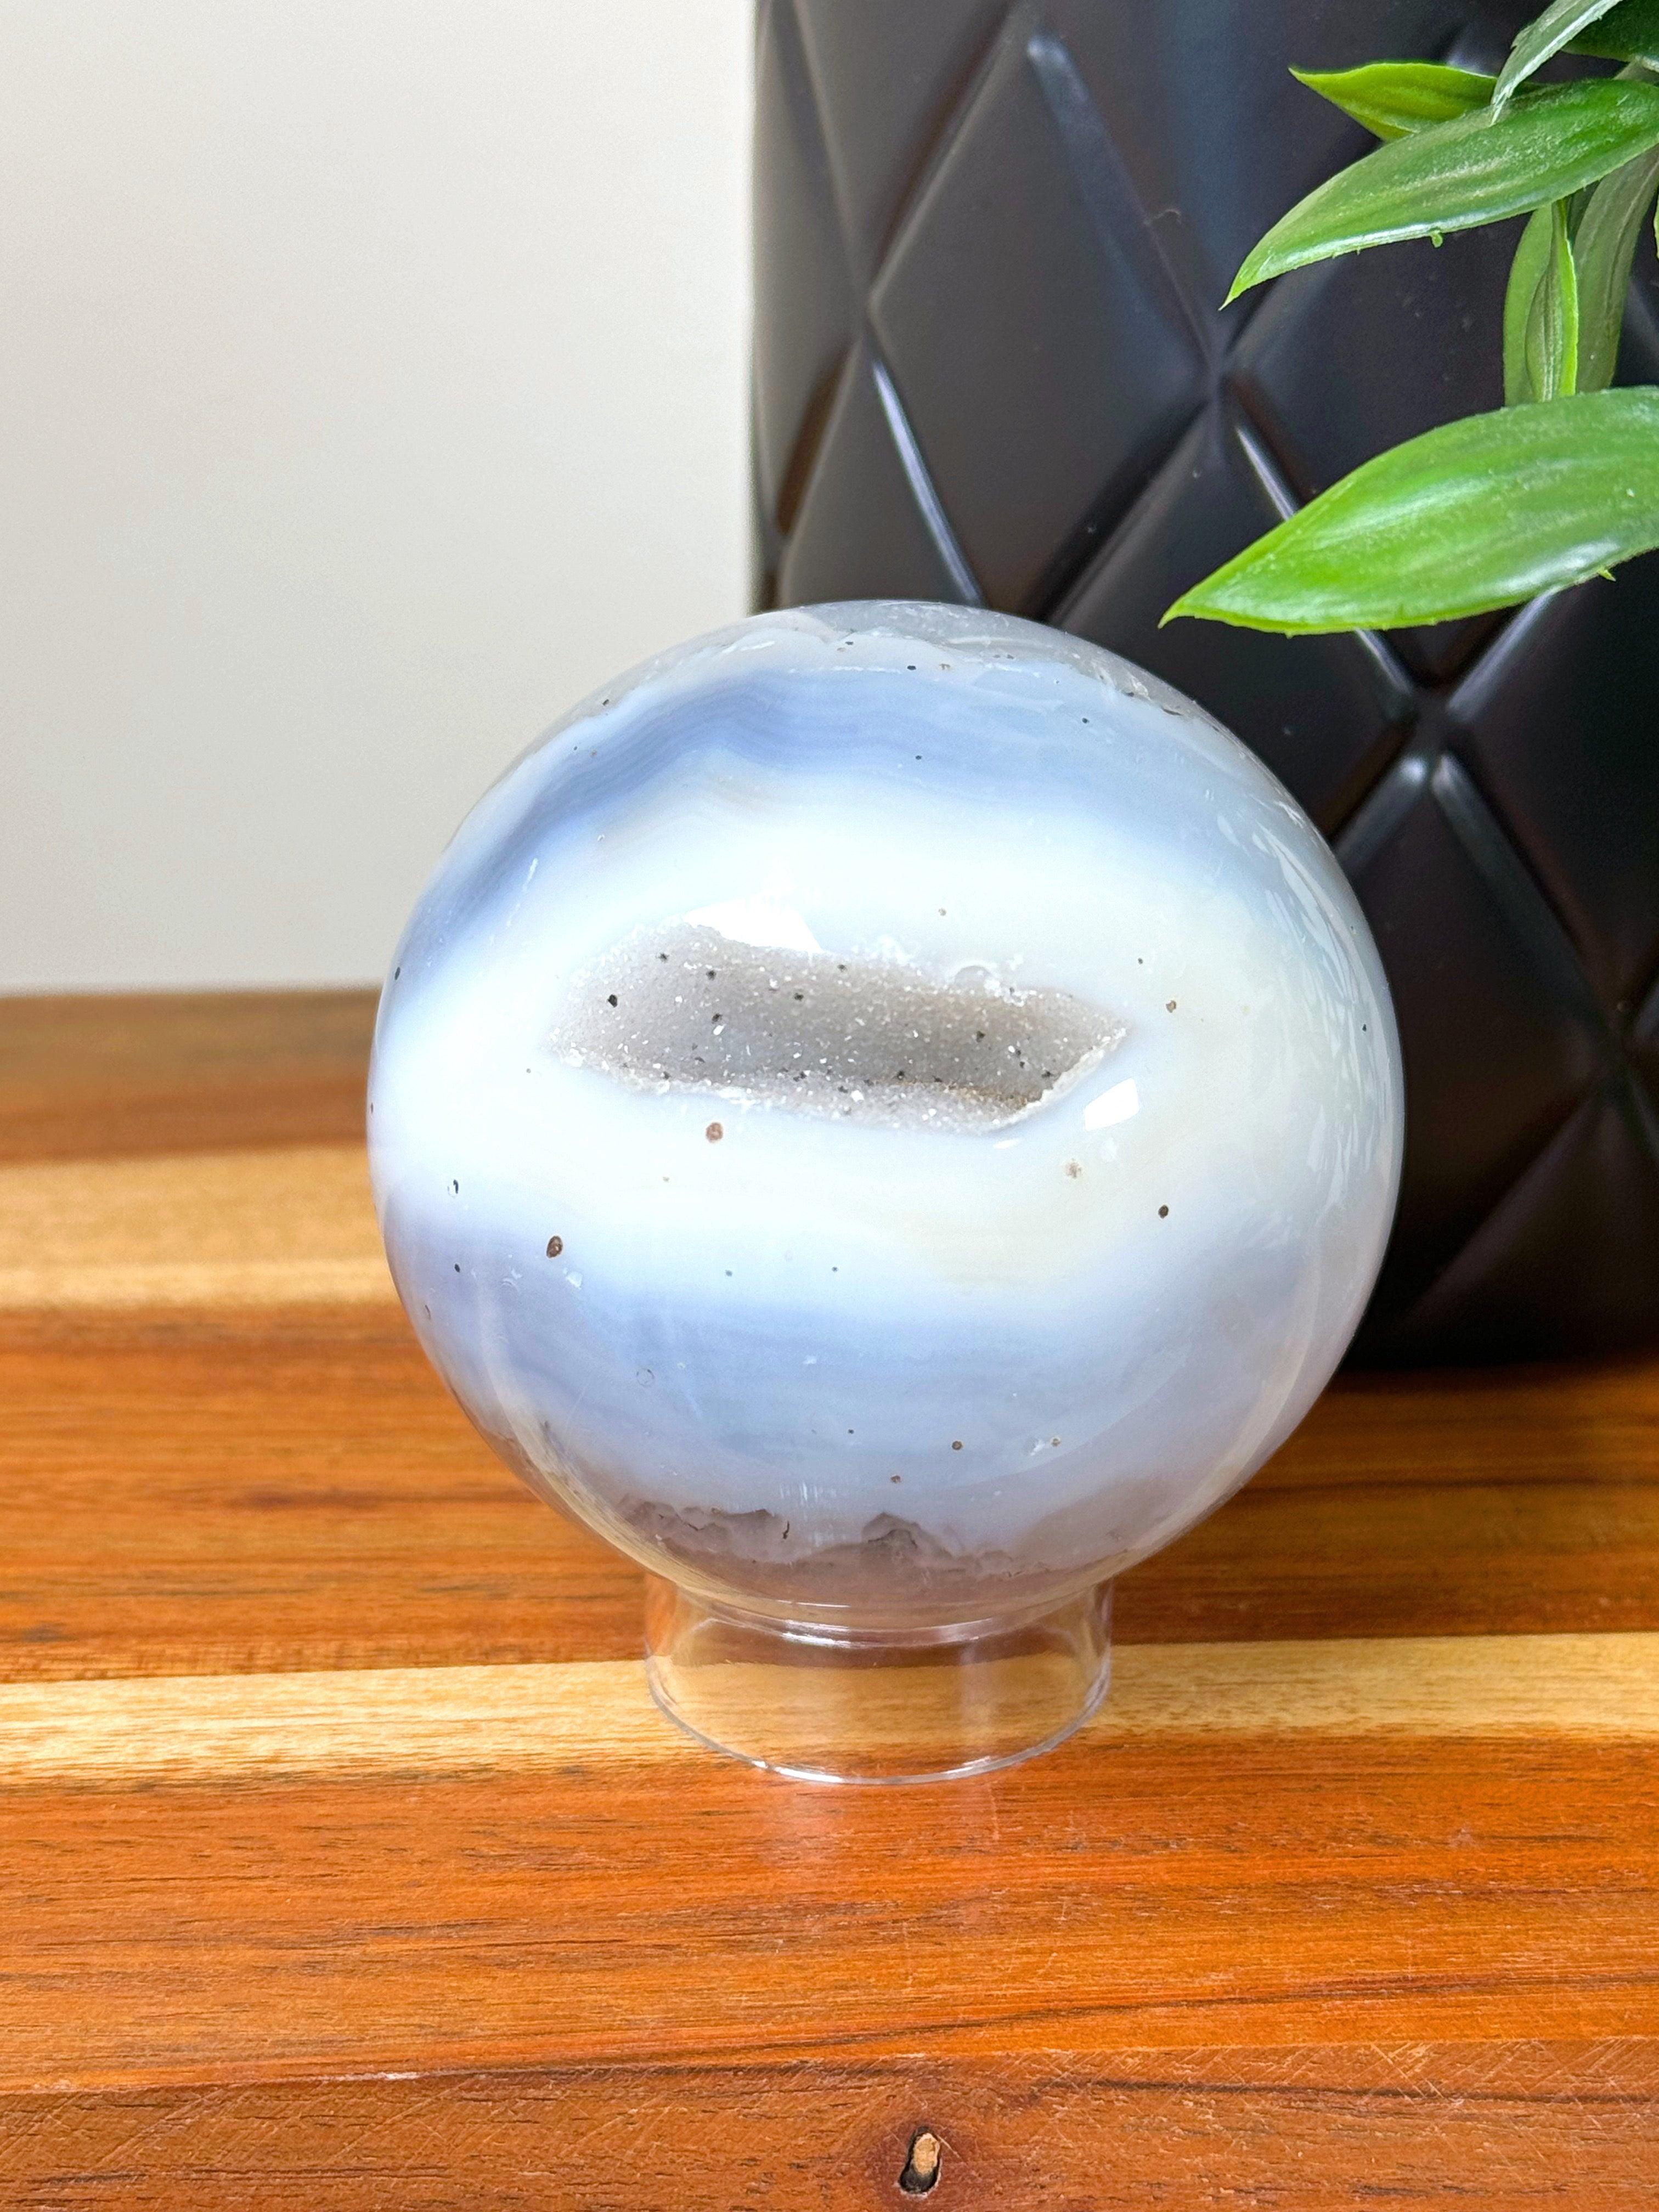 DRUZY AGATE SPHERE 16 - agate, druzy agate, googly agate, googly eye, googly eye agate, one of a kind, sphere, statement piece - The Mineral Maven